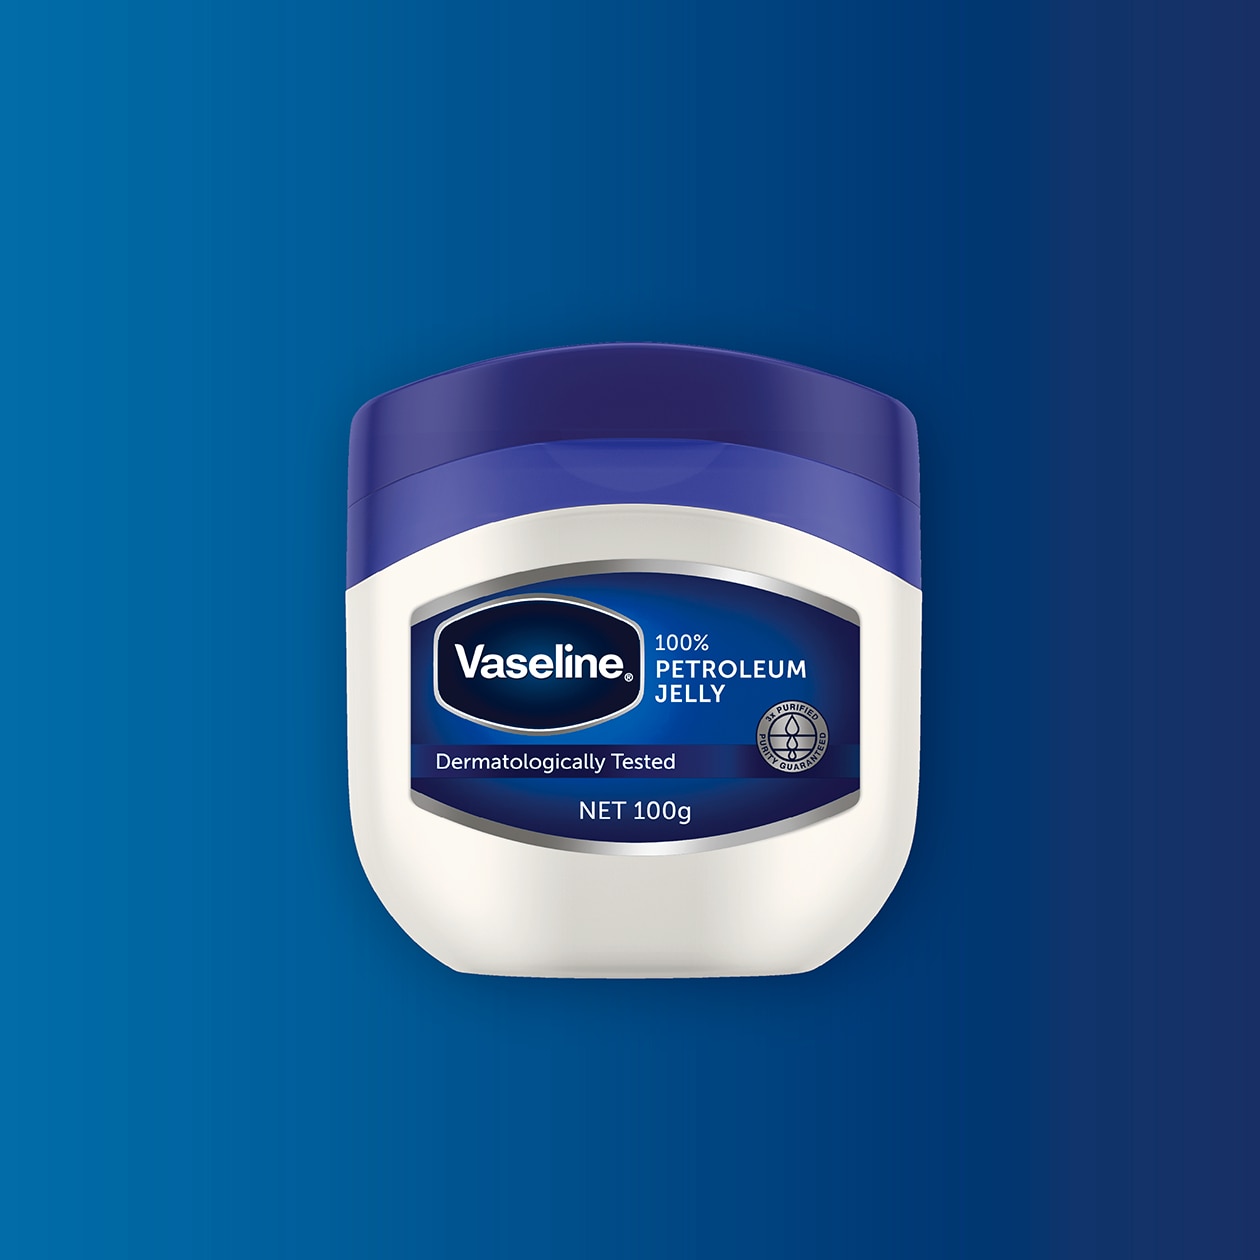 Vaseline products lineup